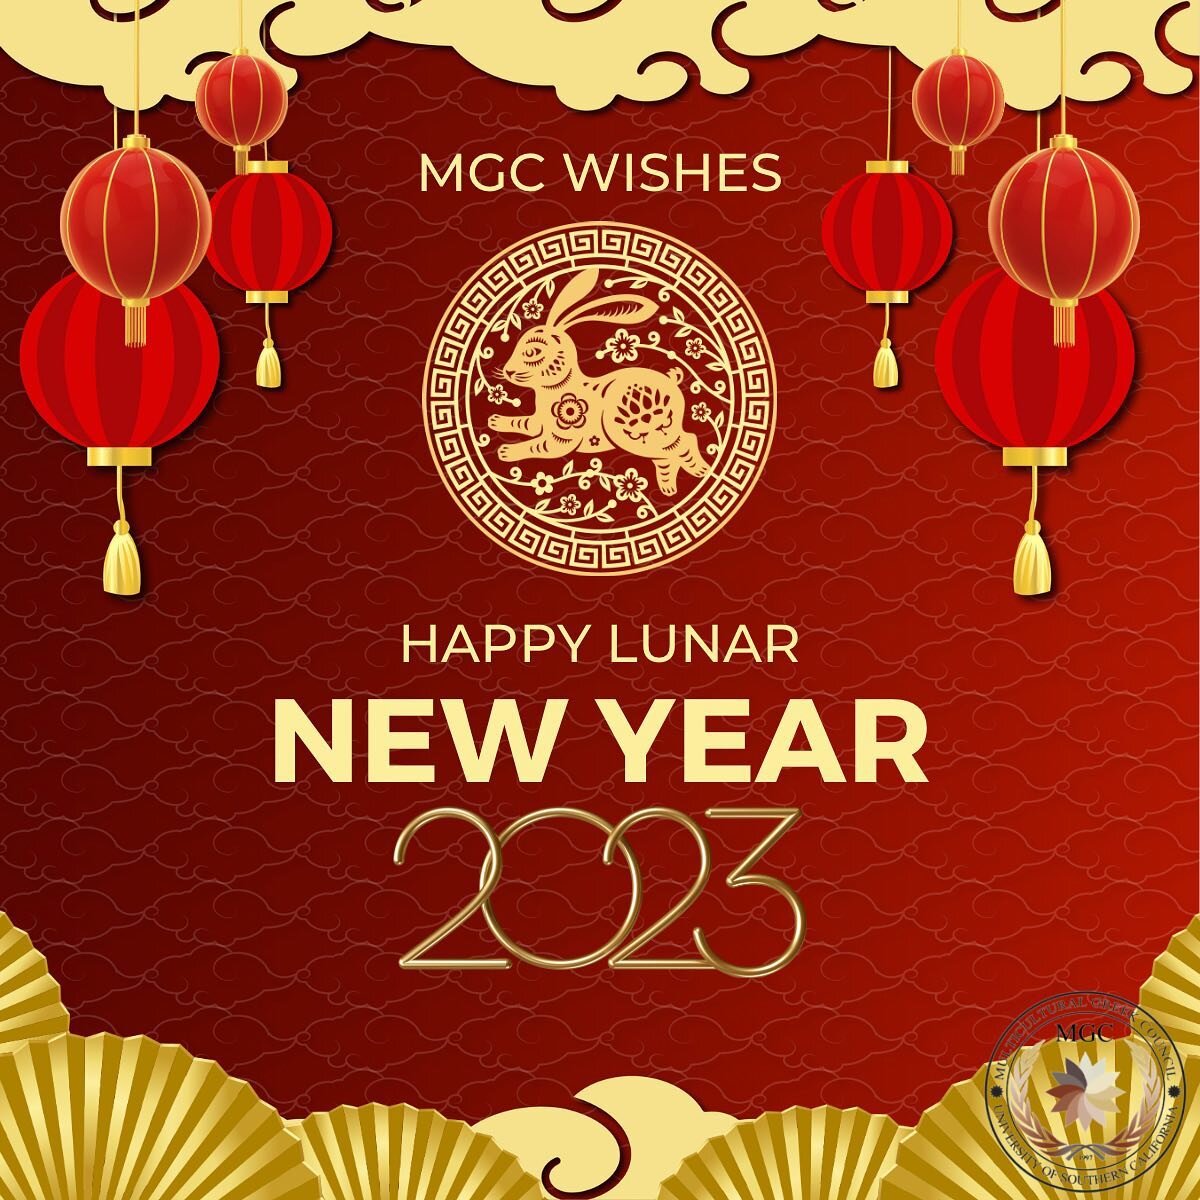 From MGC, Happy Lunar New Year🧧🎇🐇🌏